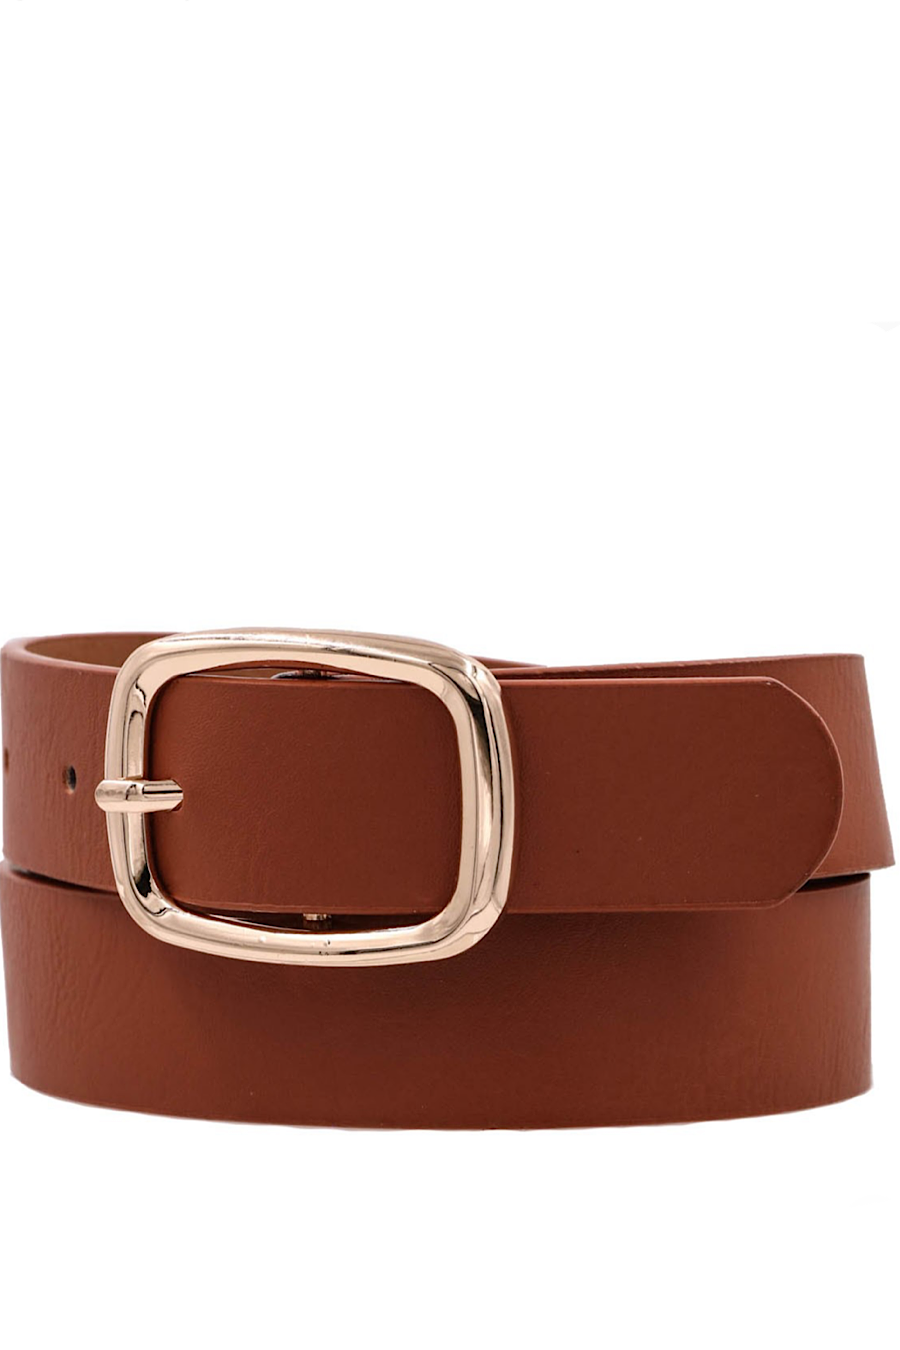 Square Buckle Belts in Tan or Black